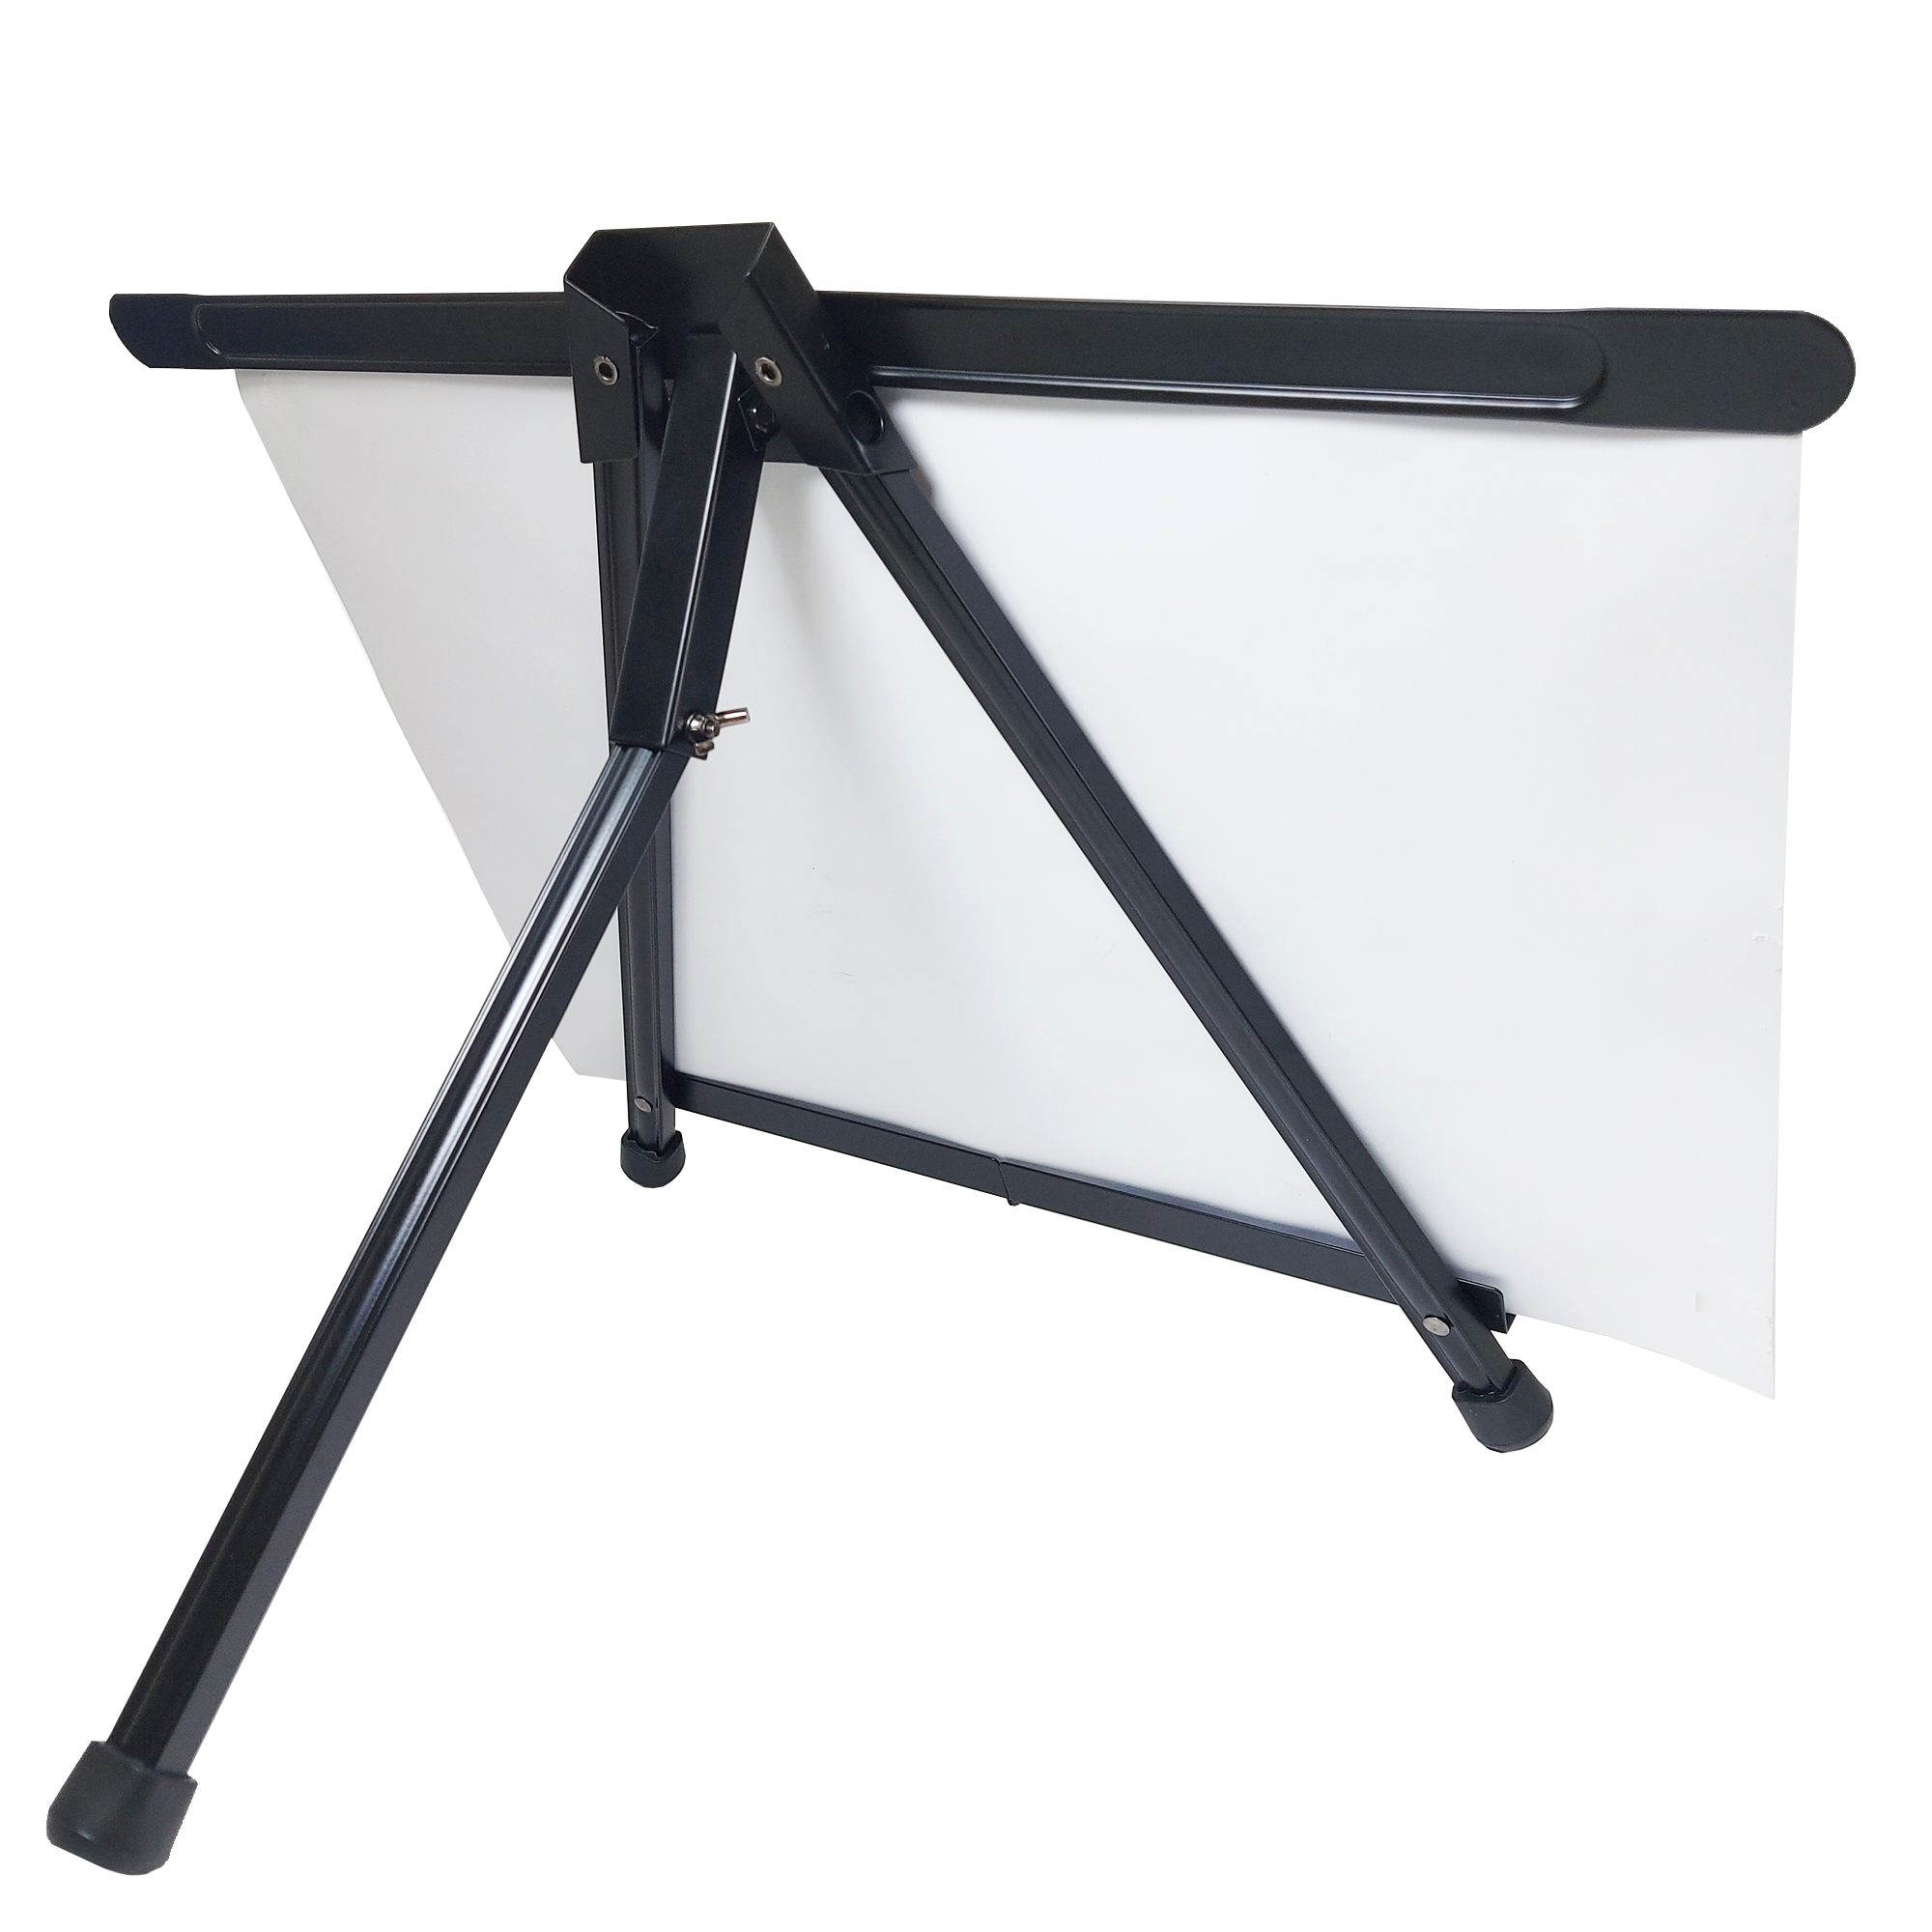 Artist's Compact Table Top Easel back